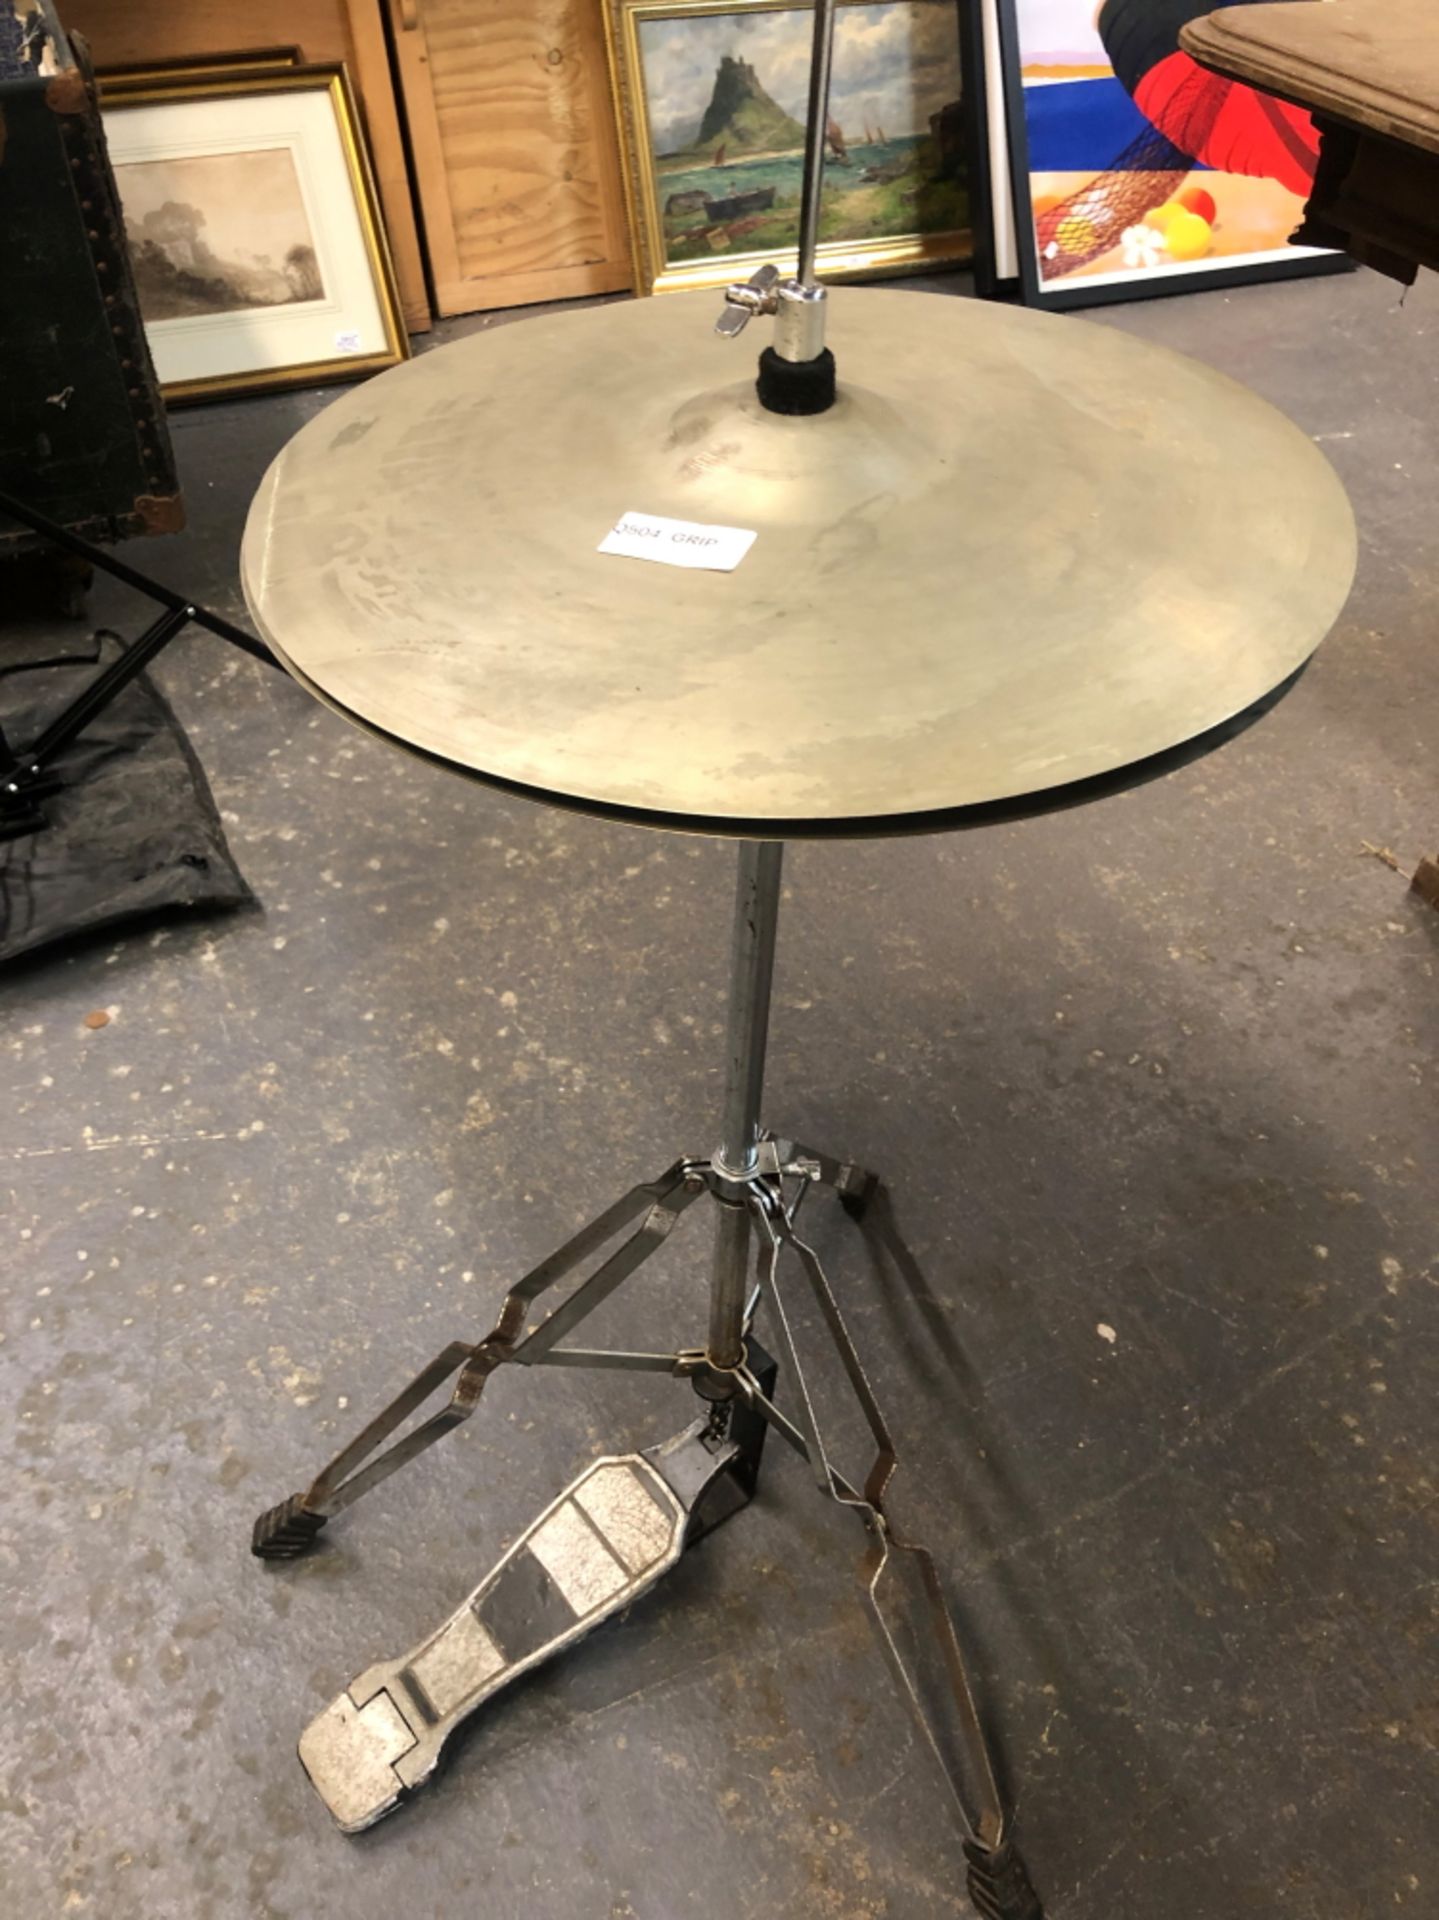 PREMIER SNARE DRUM AND STAND, HI-HAT AND STAND DRUM STOOL, BASS DRUM PEDEL VARIOUS SKINS AND CYMBALS - Image 6 of 9